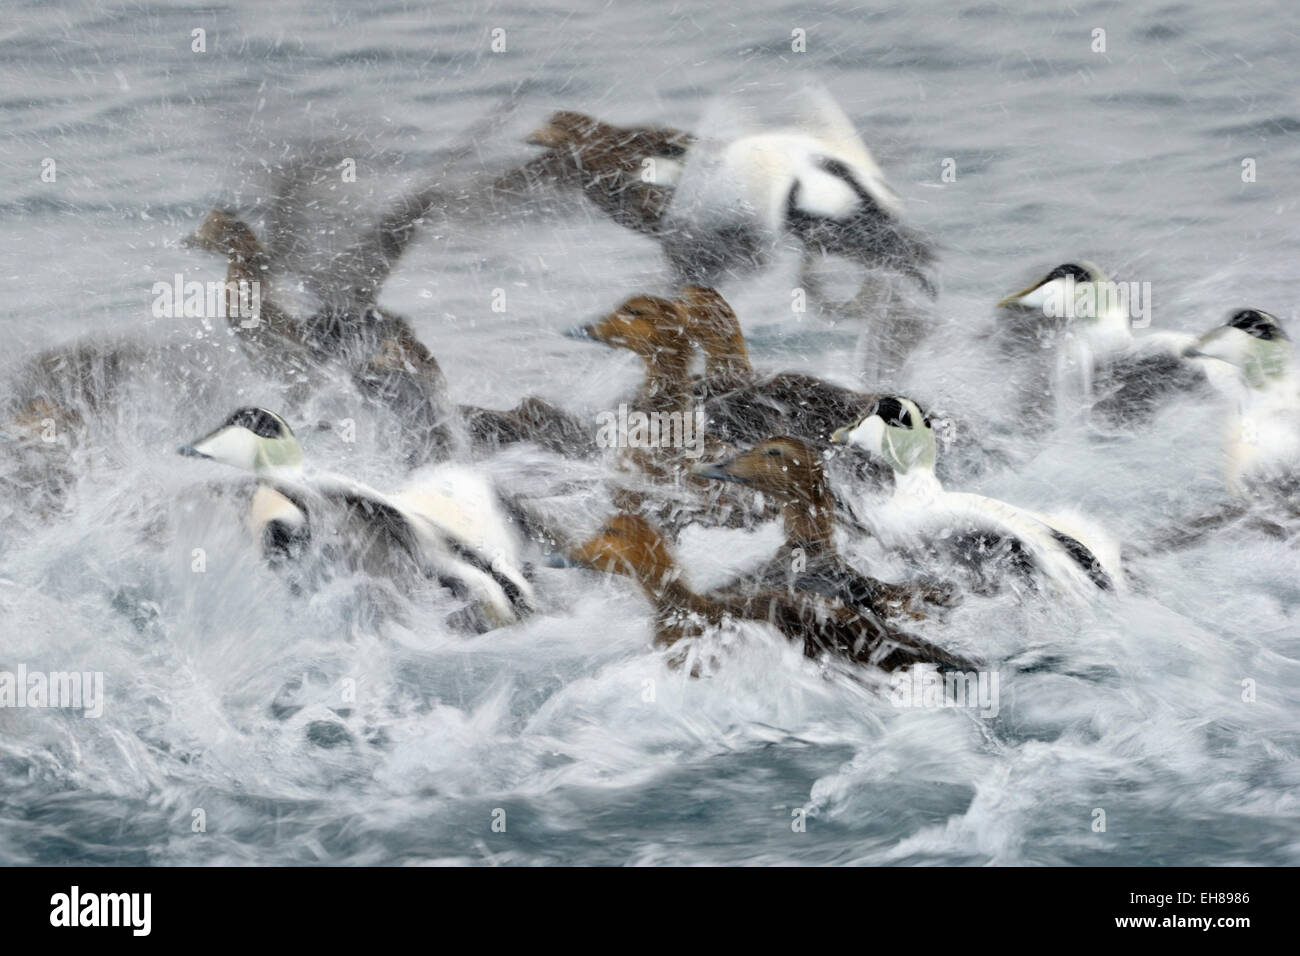 Group of Common Eider (Somateria mollissima) taking off from water, with slow shutter speed and motion blur,  Vadsö, Norway. Stock Photo